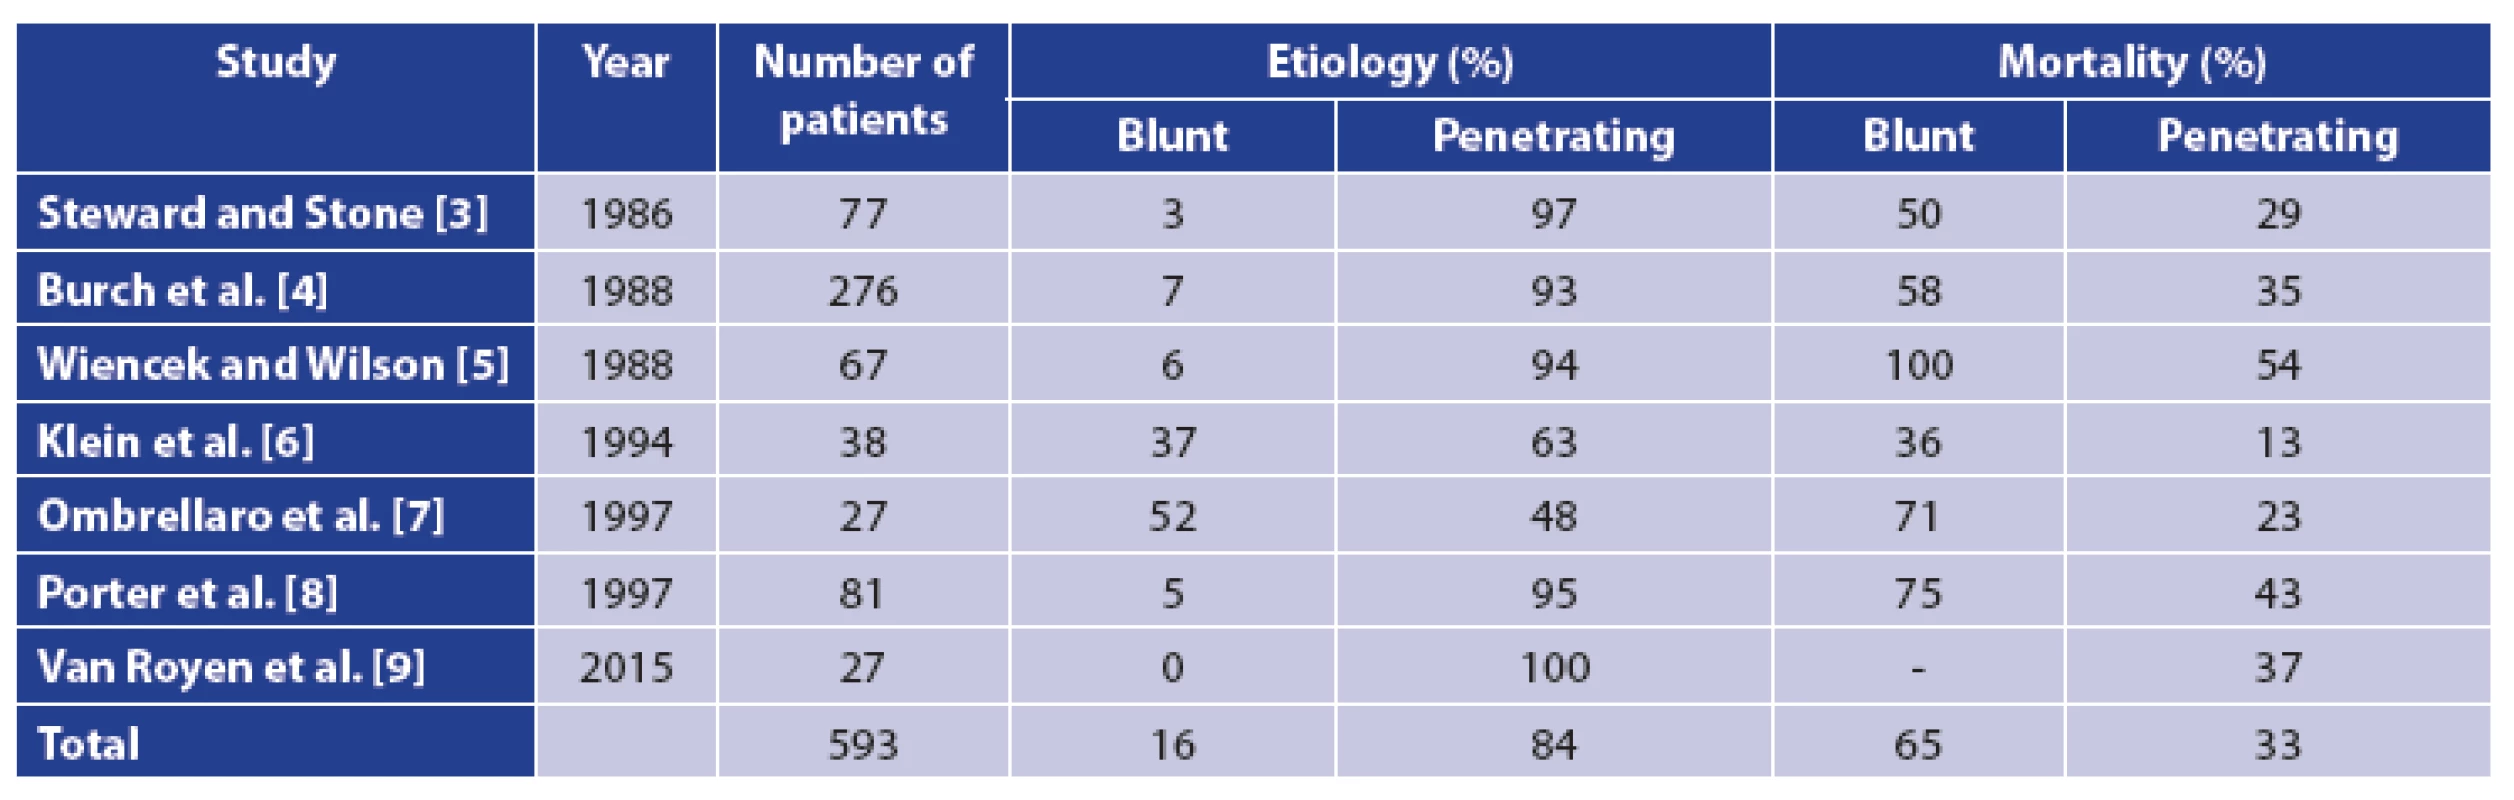 Etiologies and mortalities of blunt and penetrating injuries of the inferior vena cava [2]